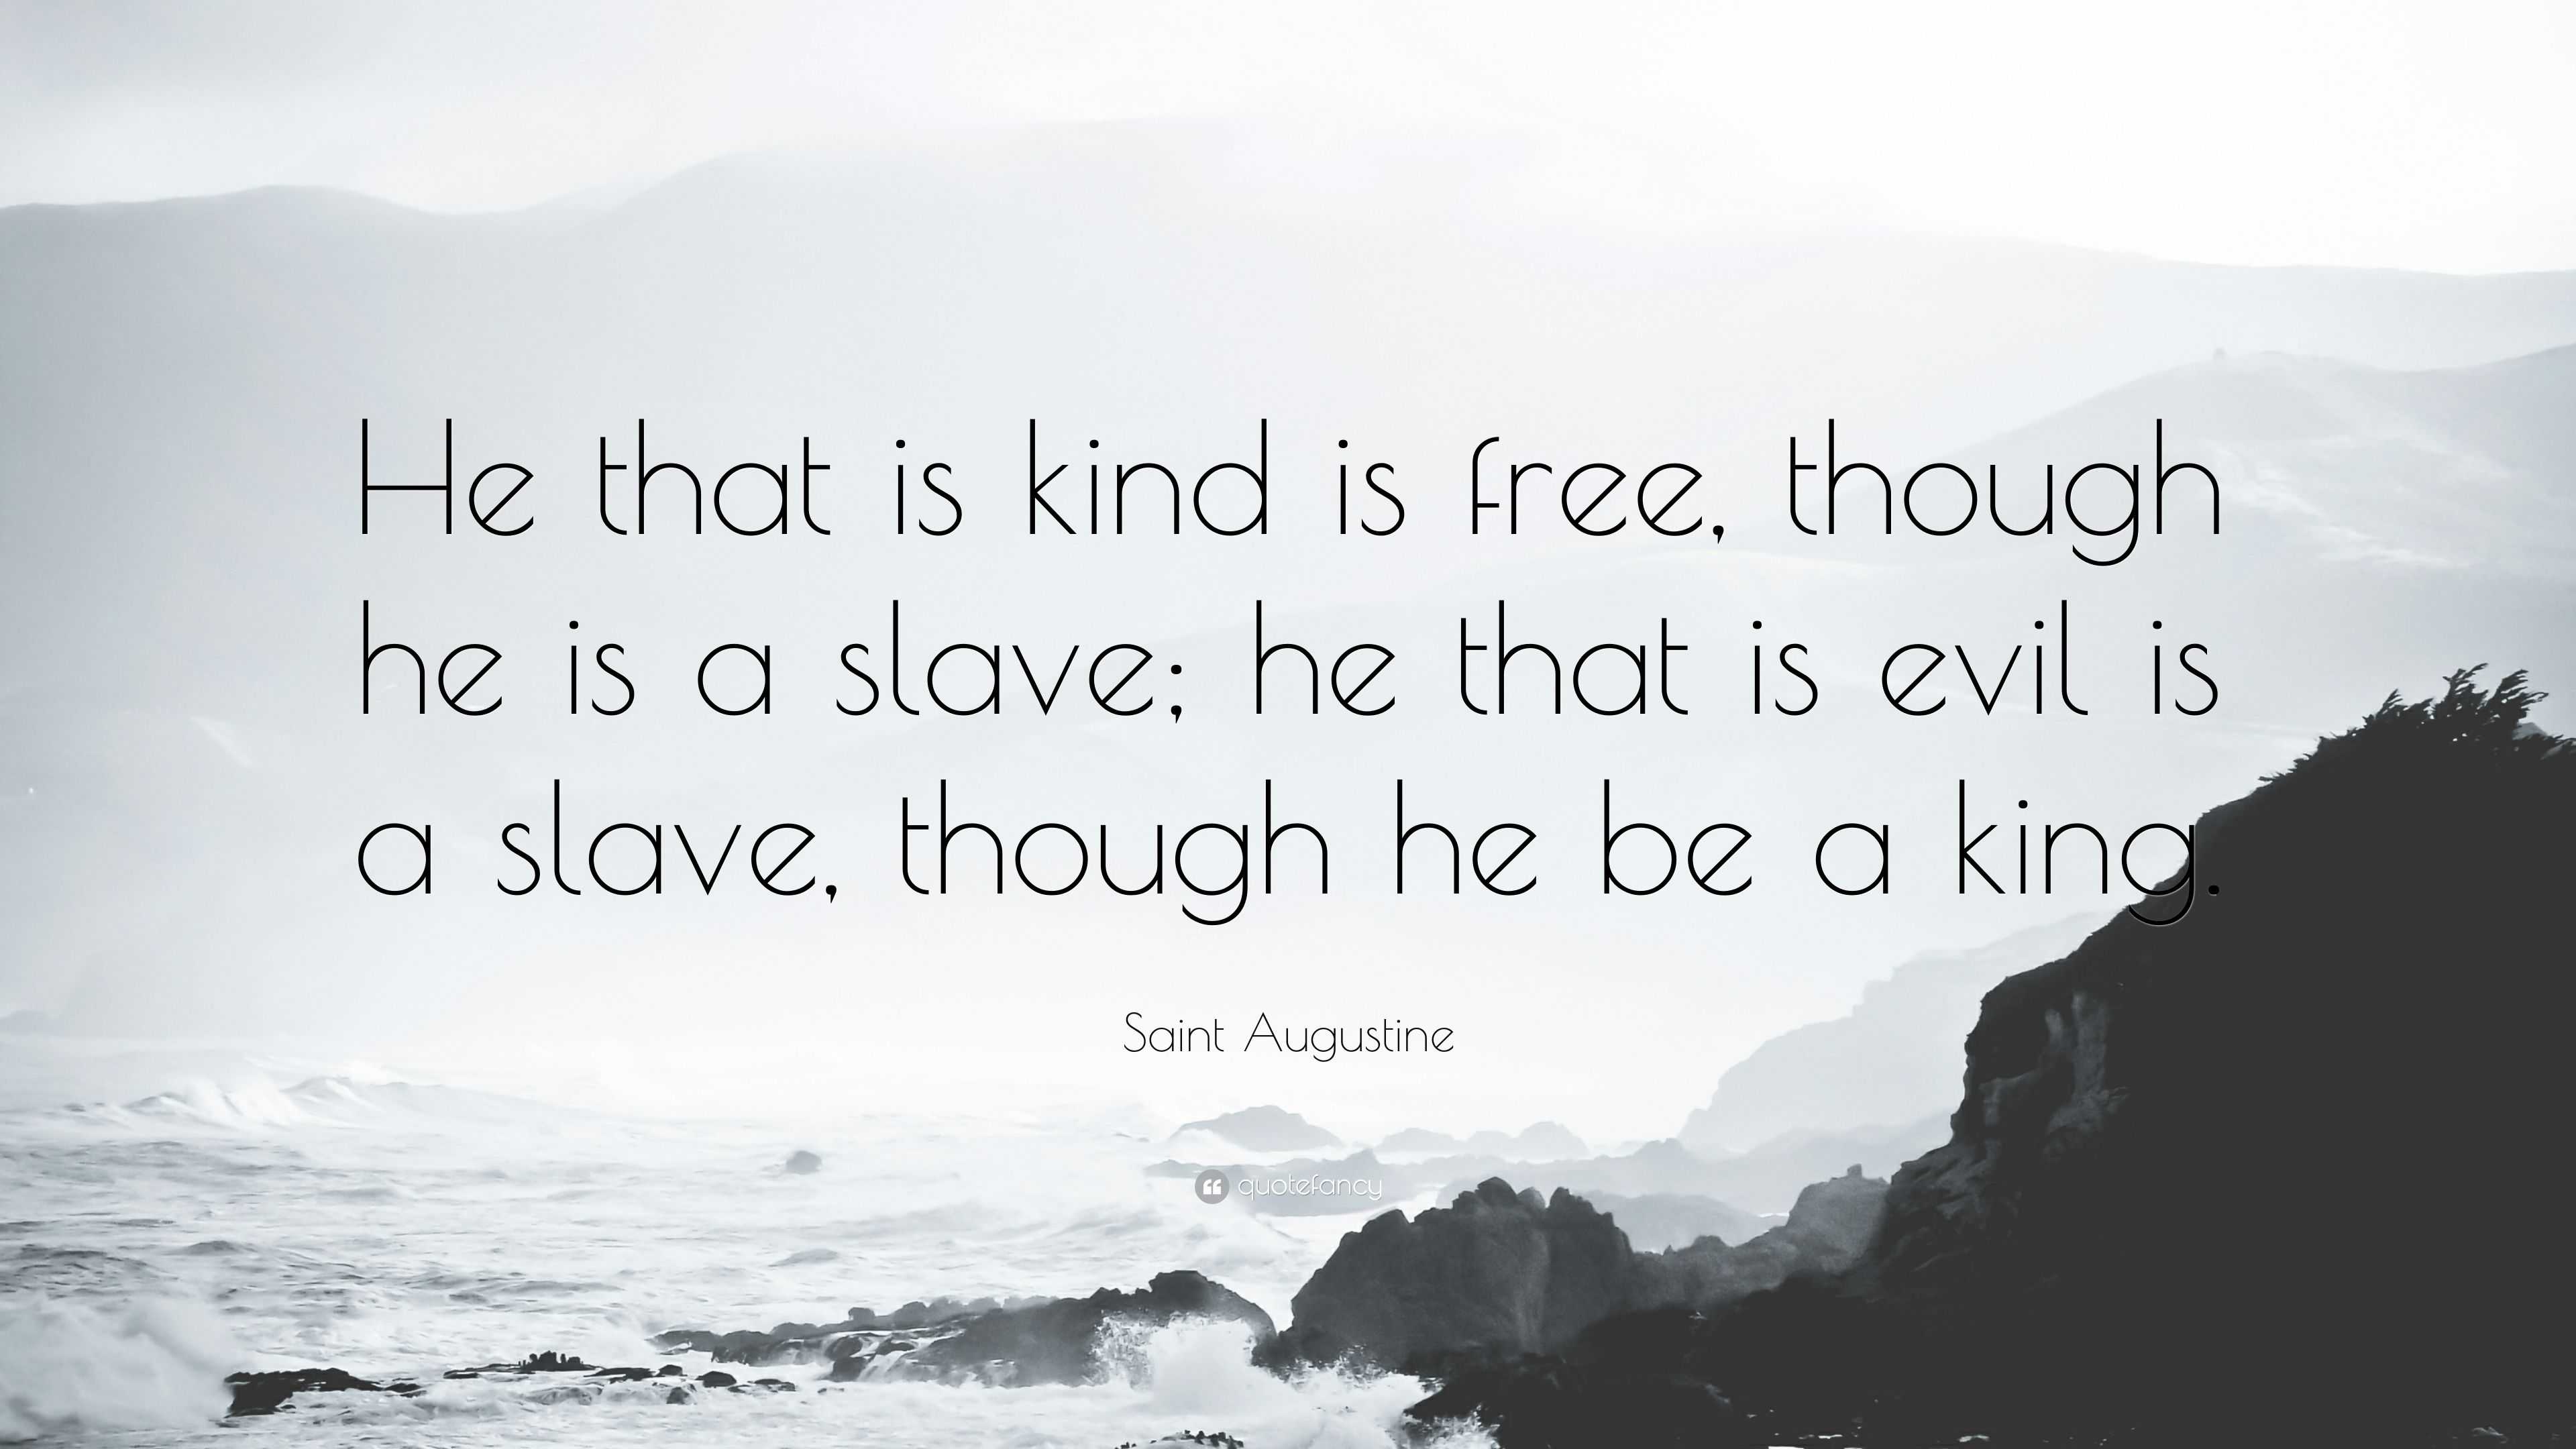 Saint Augustine Quote: “He that is kind is free, though he is a slave ...